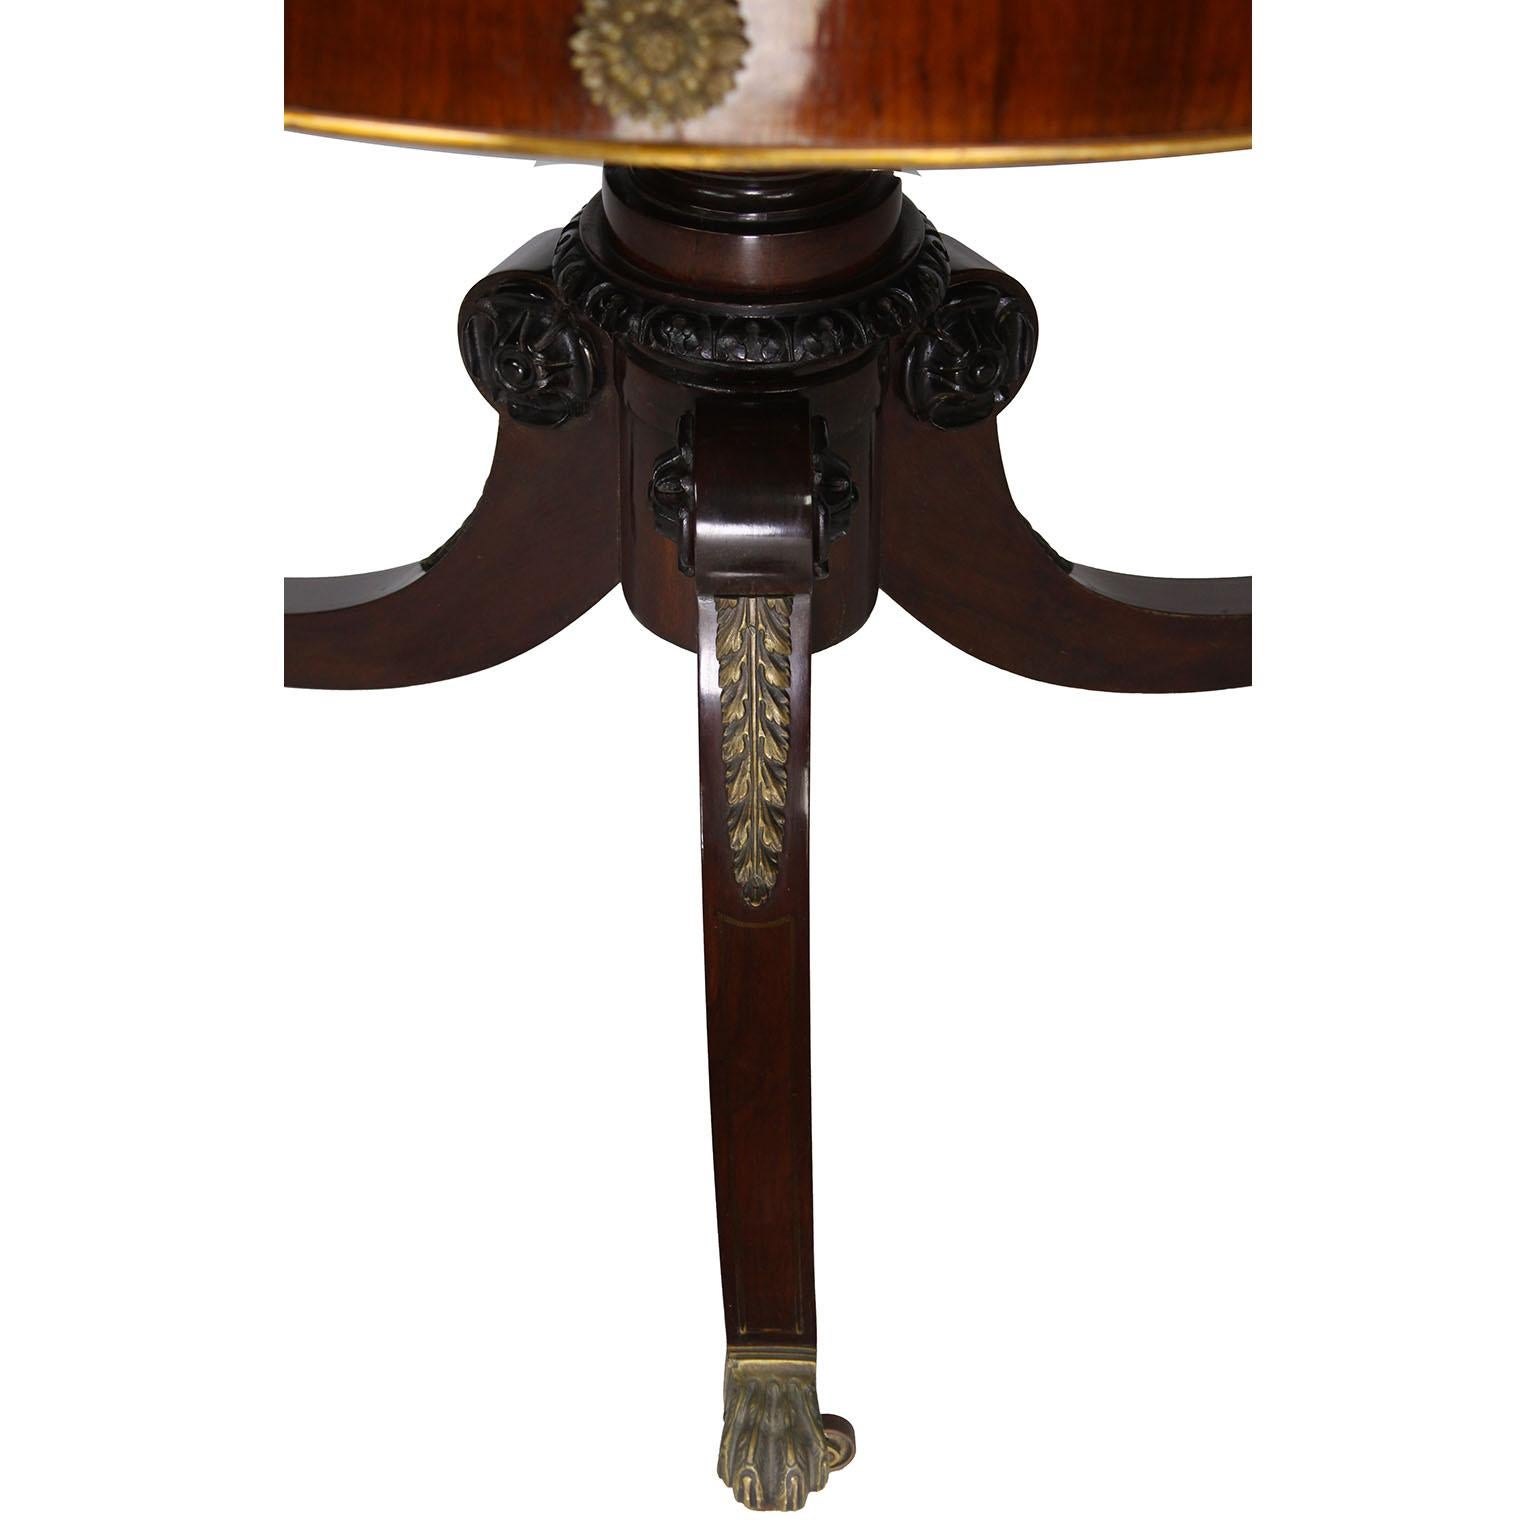 Early 20th Century Round English 19th C. Regency Style Rosewood Inlaid Game Table, Attr. Maple & Co